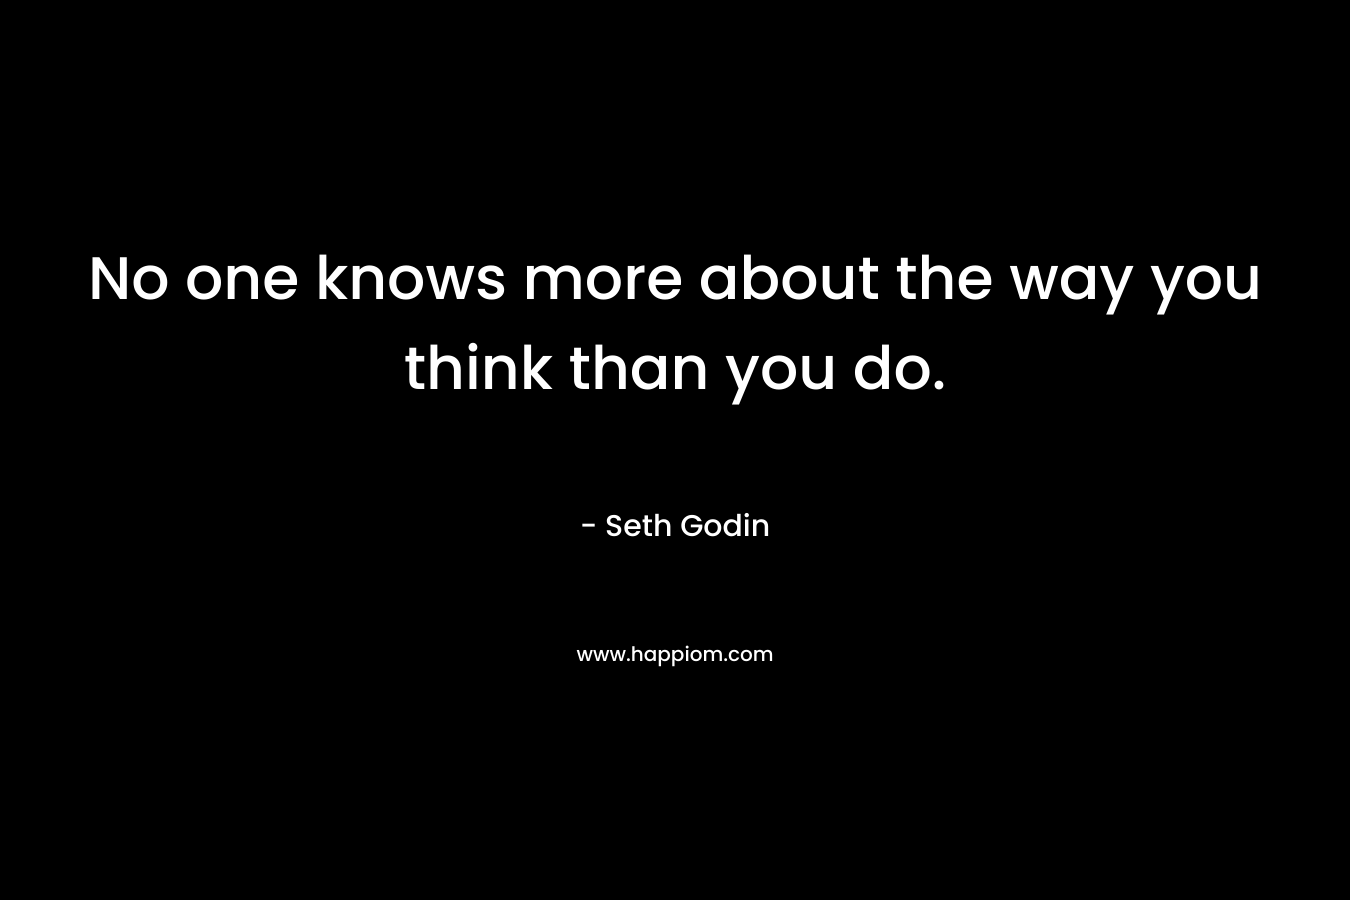 No one knows more about the way you think than you do. – Seth Godin